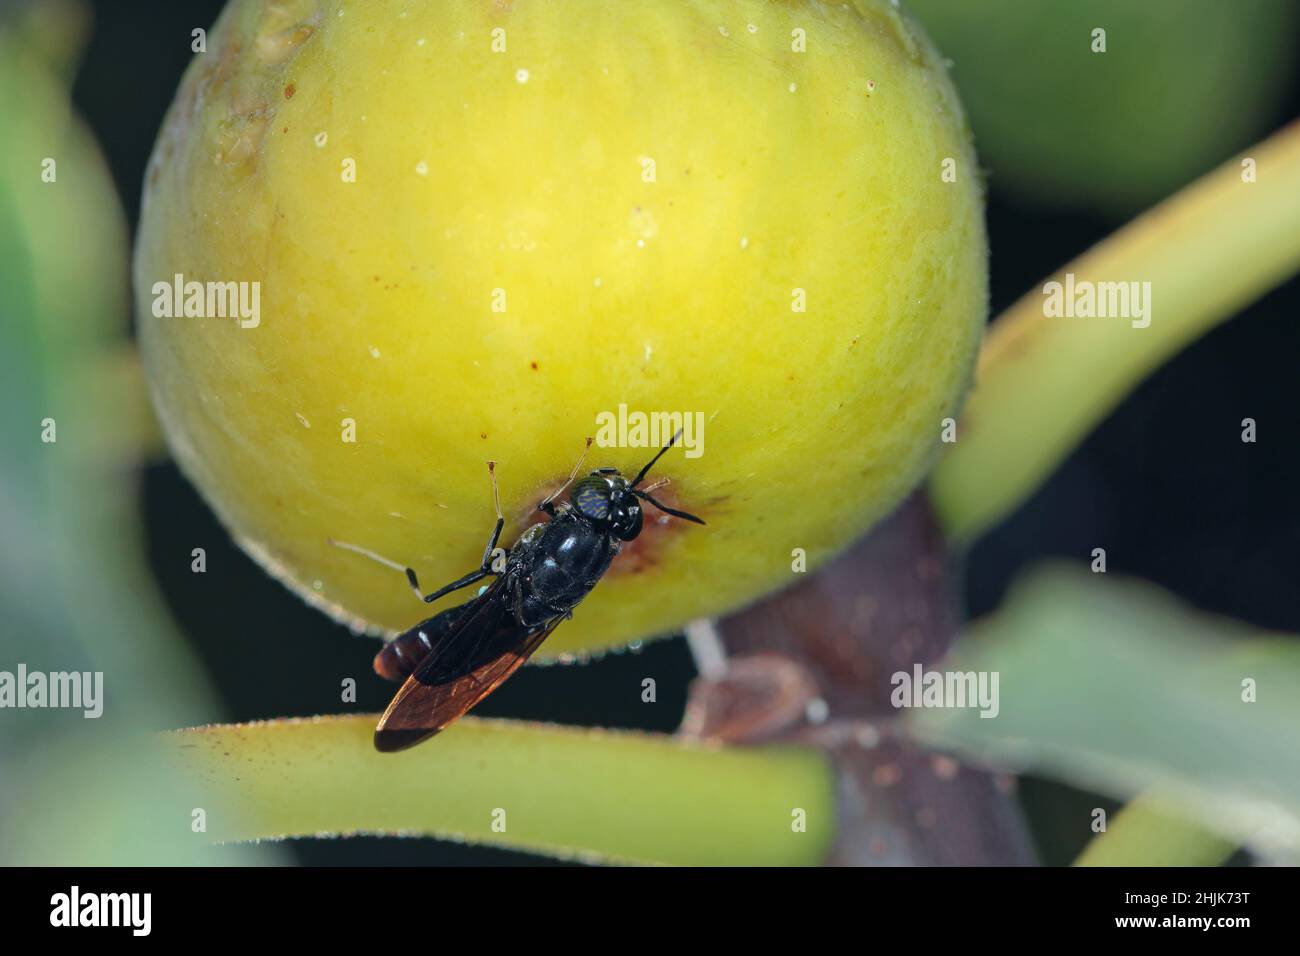 Black Soldier Fly - latin name is Hermetia illucens.  Close-up of fly sitting on a ripe fig. This species is used in the production of protein. Stock Photo